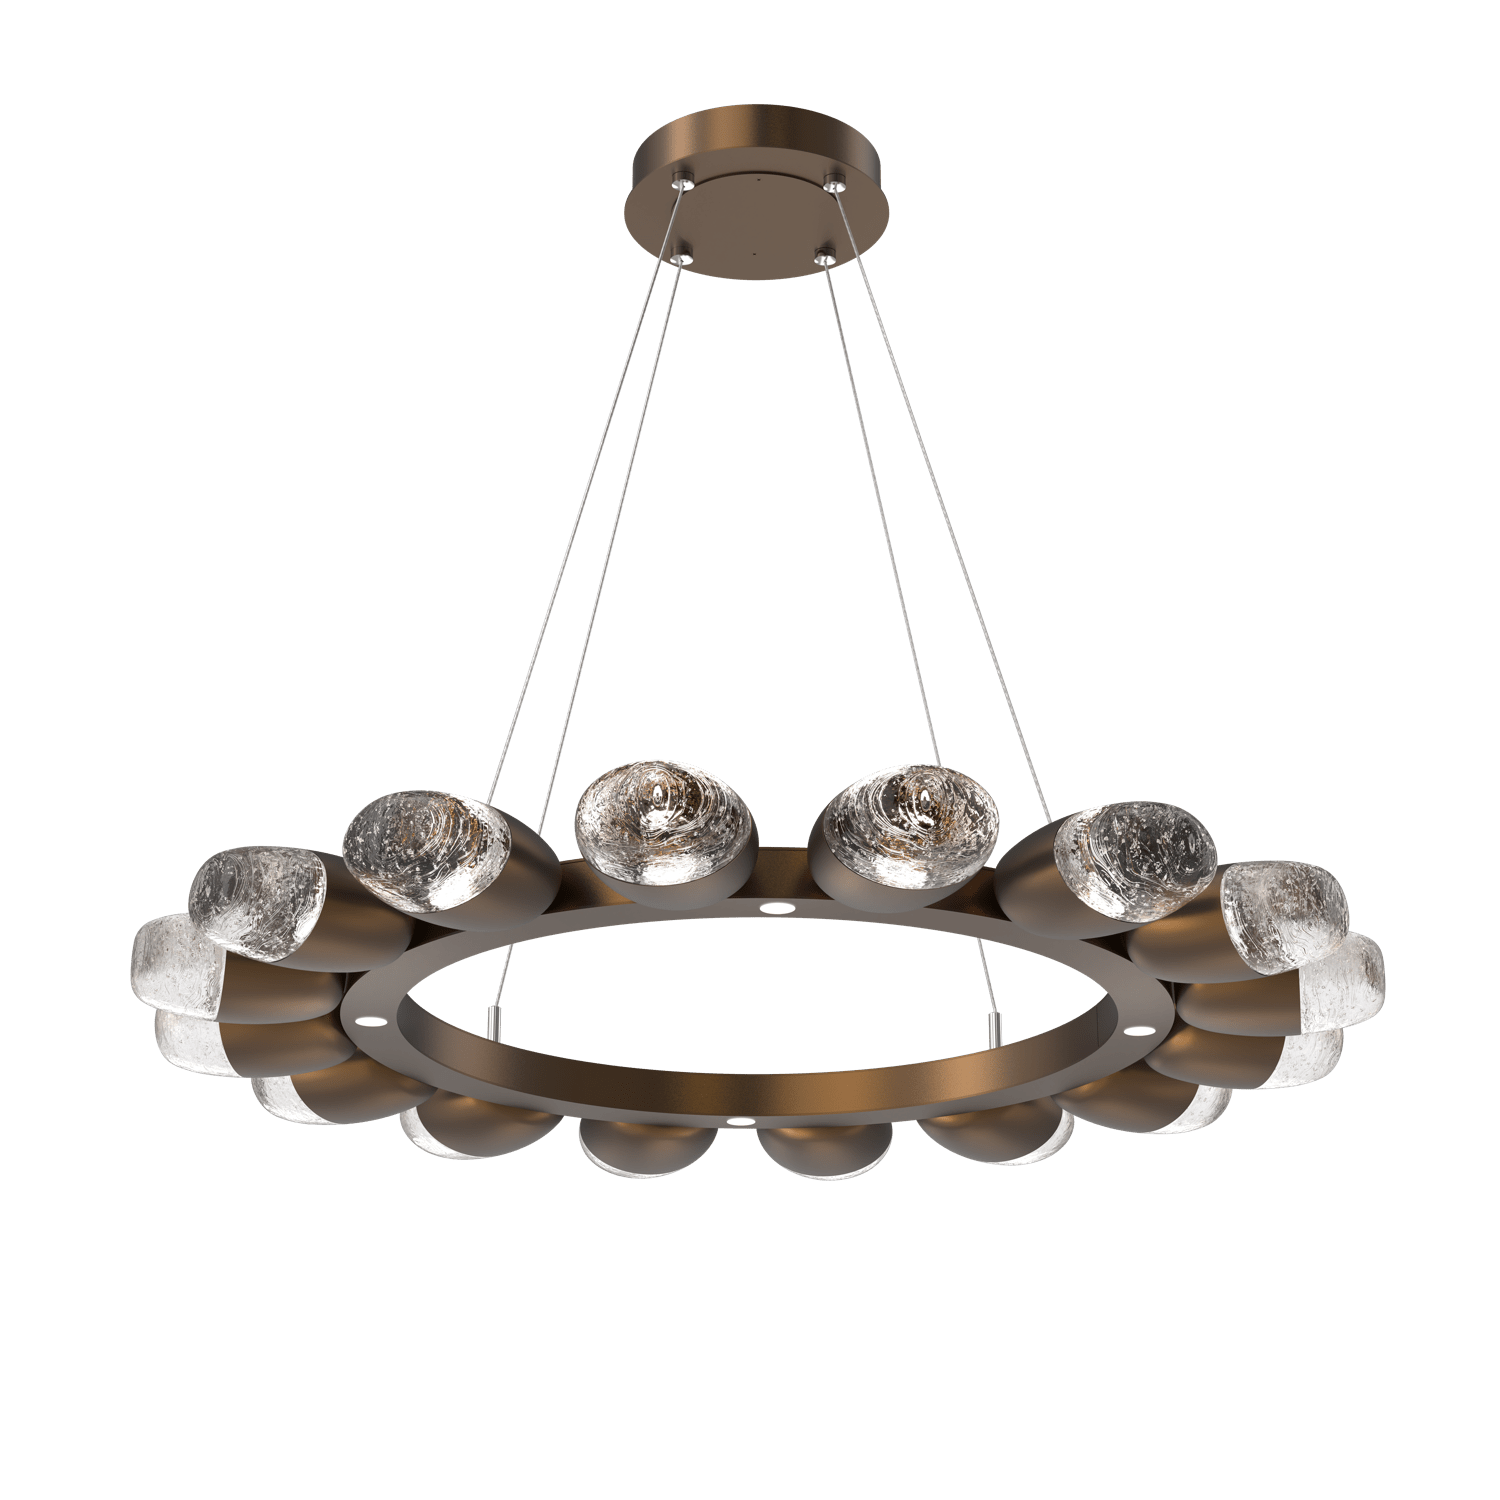 CHB0079-36-FB-Hammerton-Studio-Pebble-36-inch-radial-ring-chandelier-with-flat-bronze-finish-and-clear-cast-glass-shades-and-LED-lamping